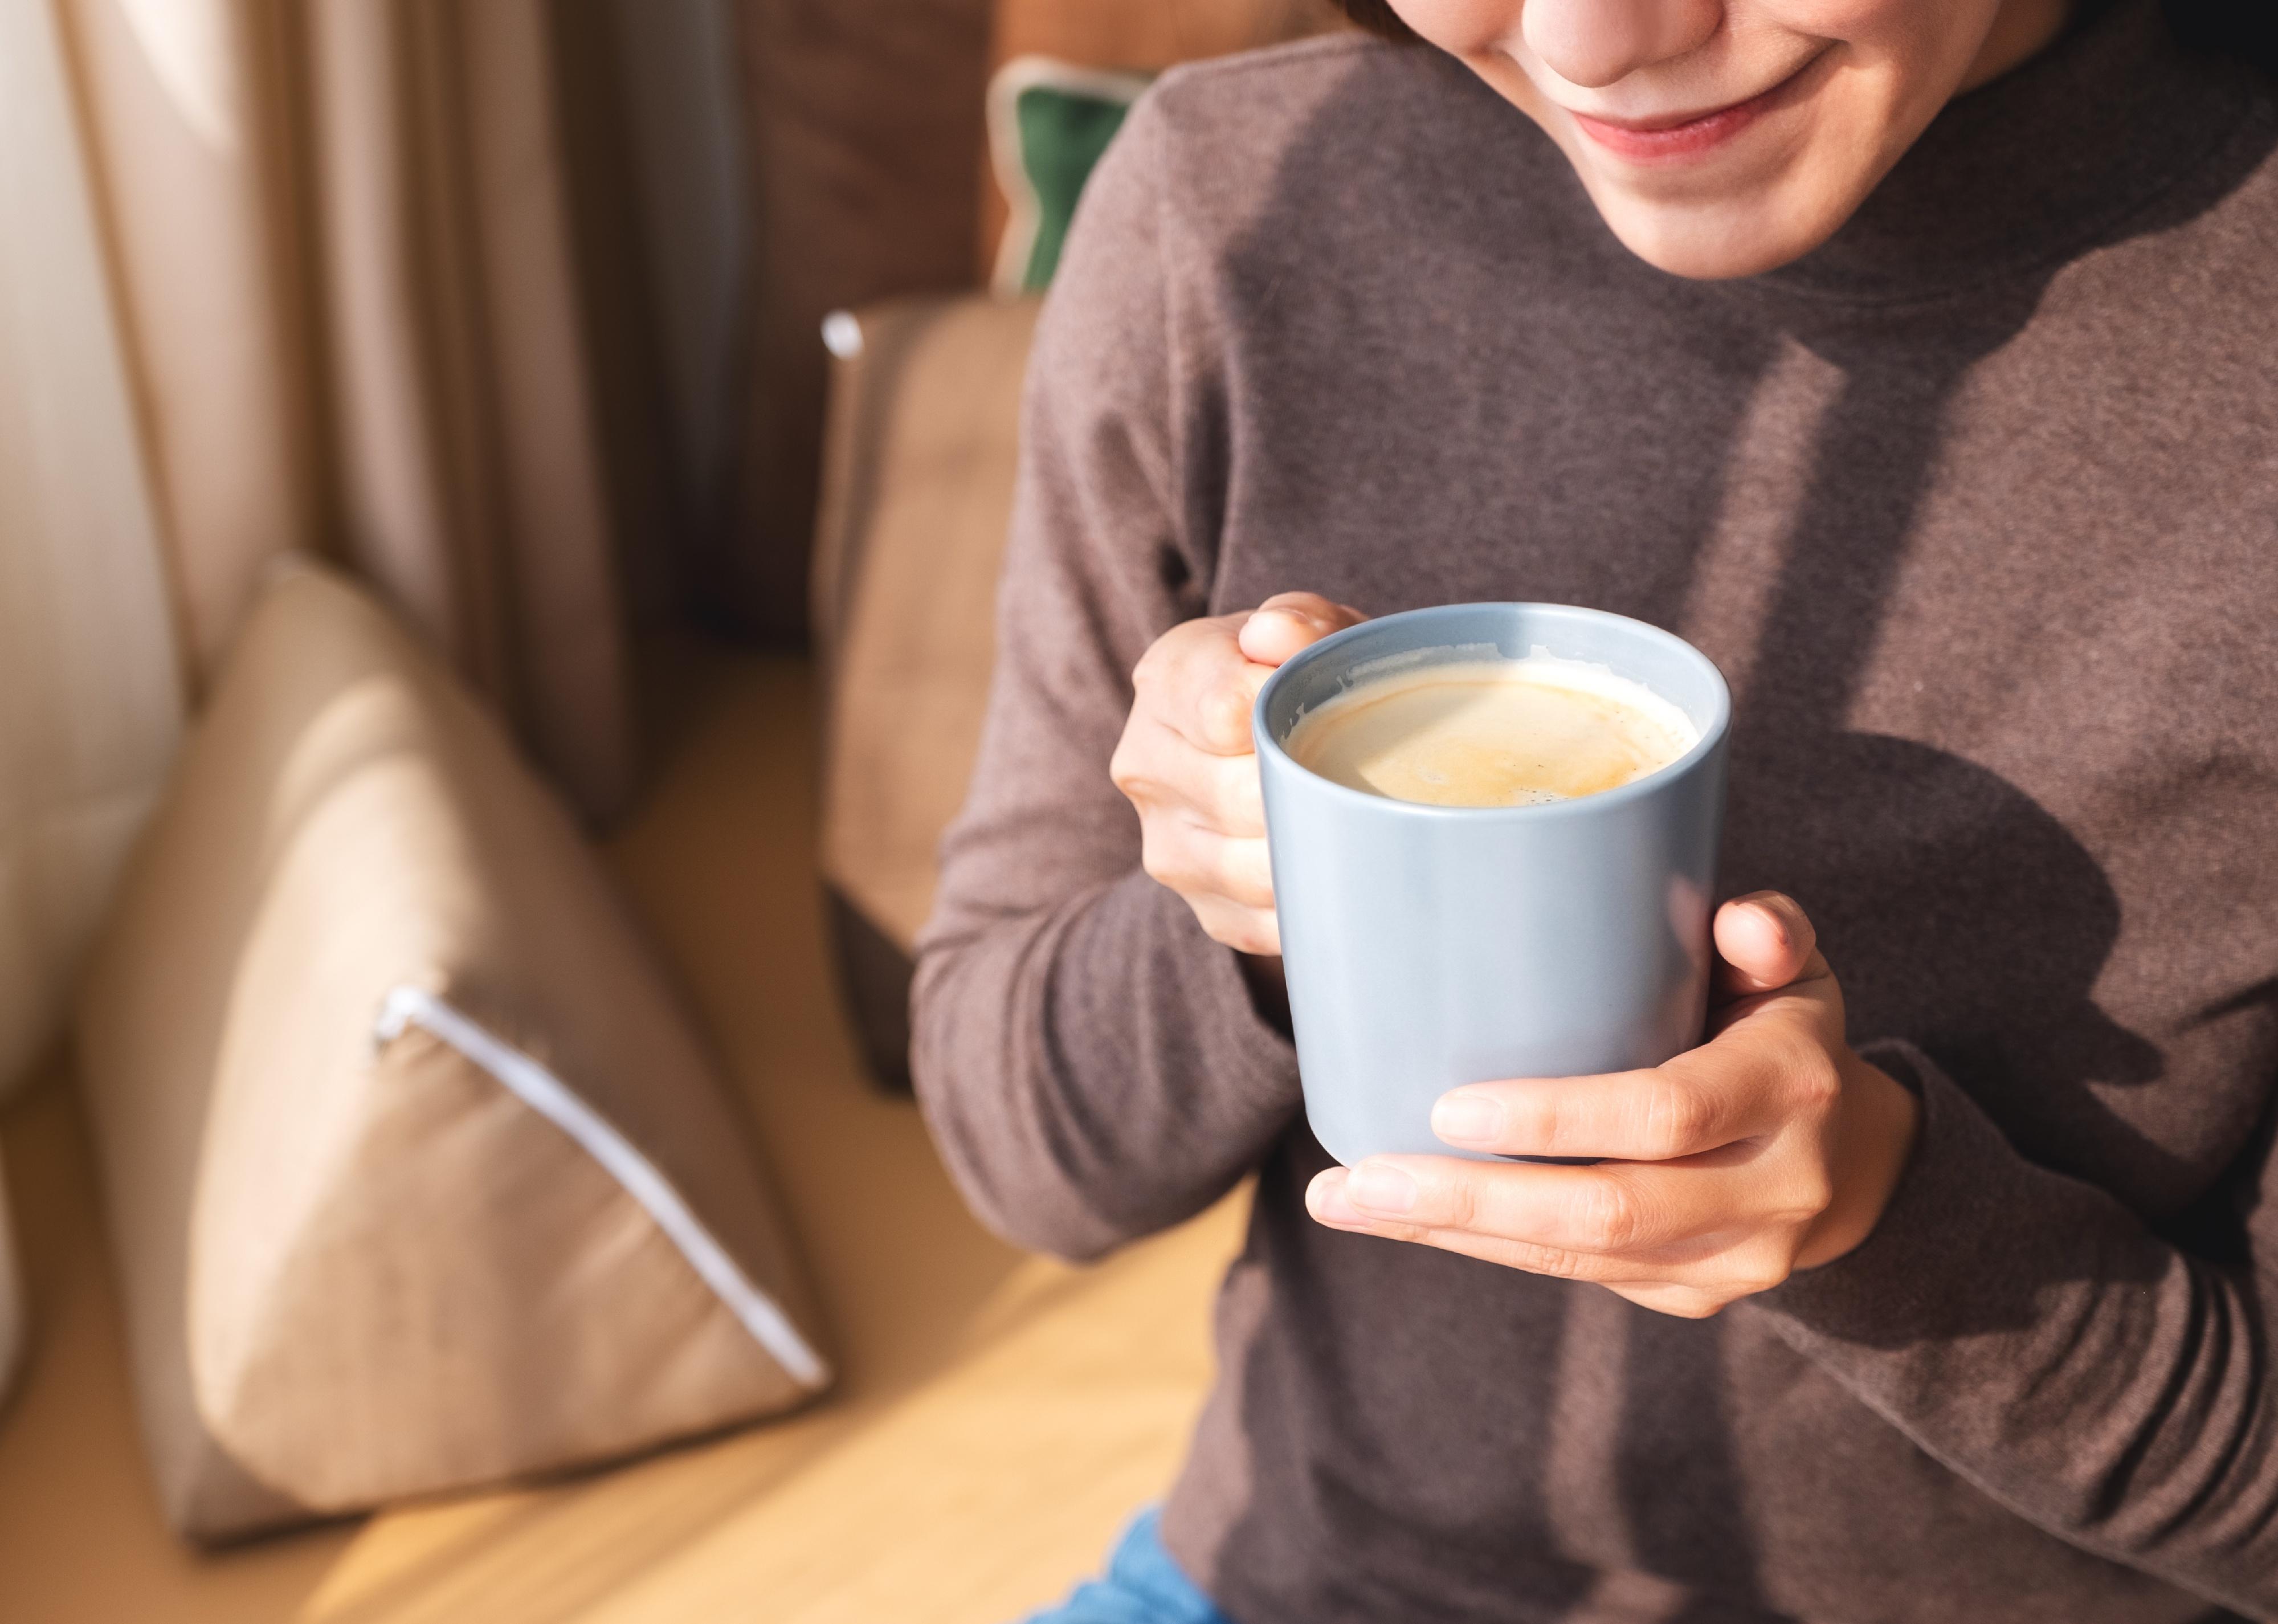 Closeup image of a young woman drinking hot coffee at home in the morning.